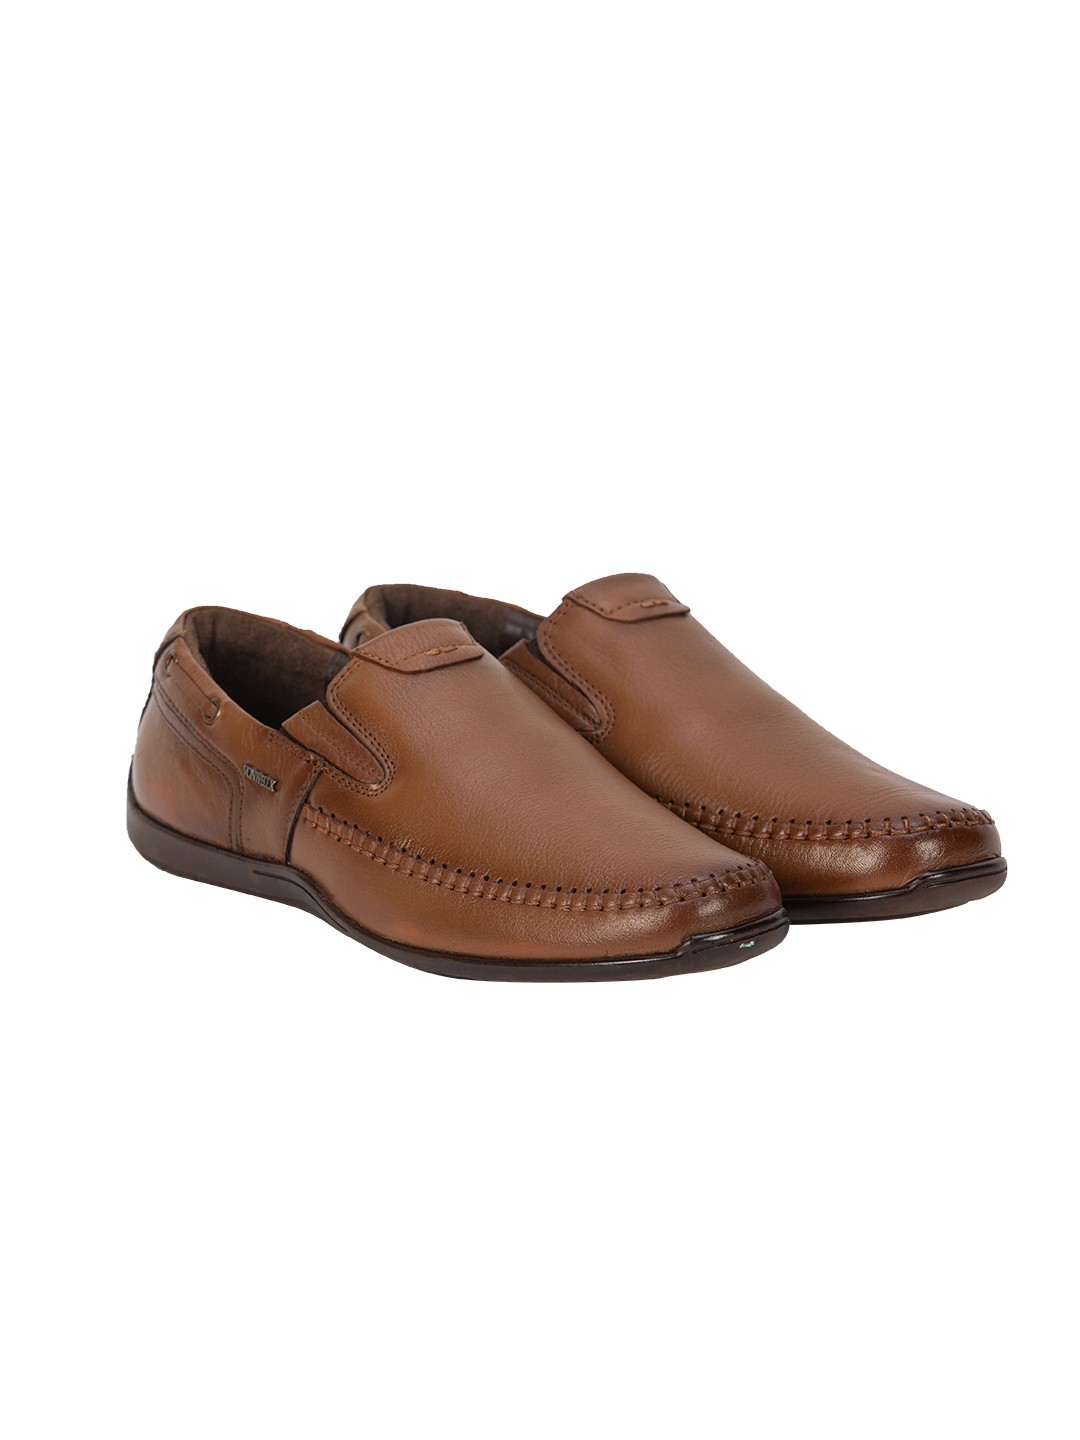 Buy Von Wellx Axel Casual Tan Shoes Online in Jeddah